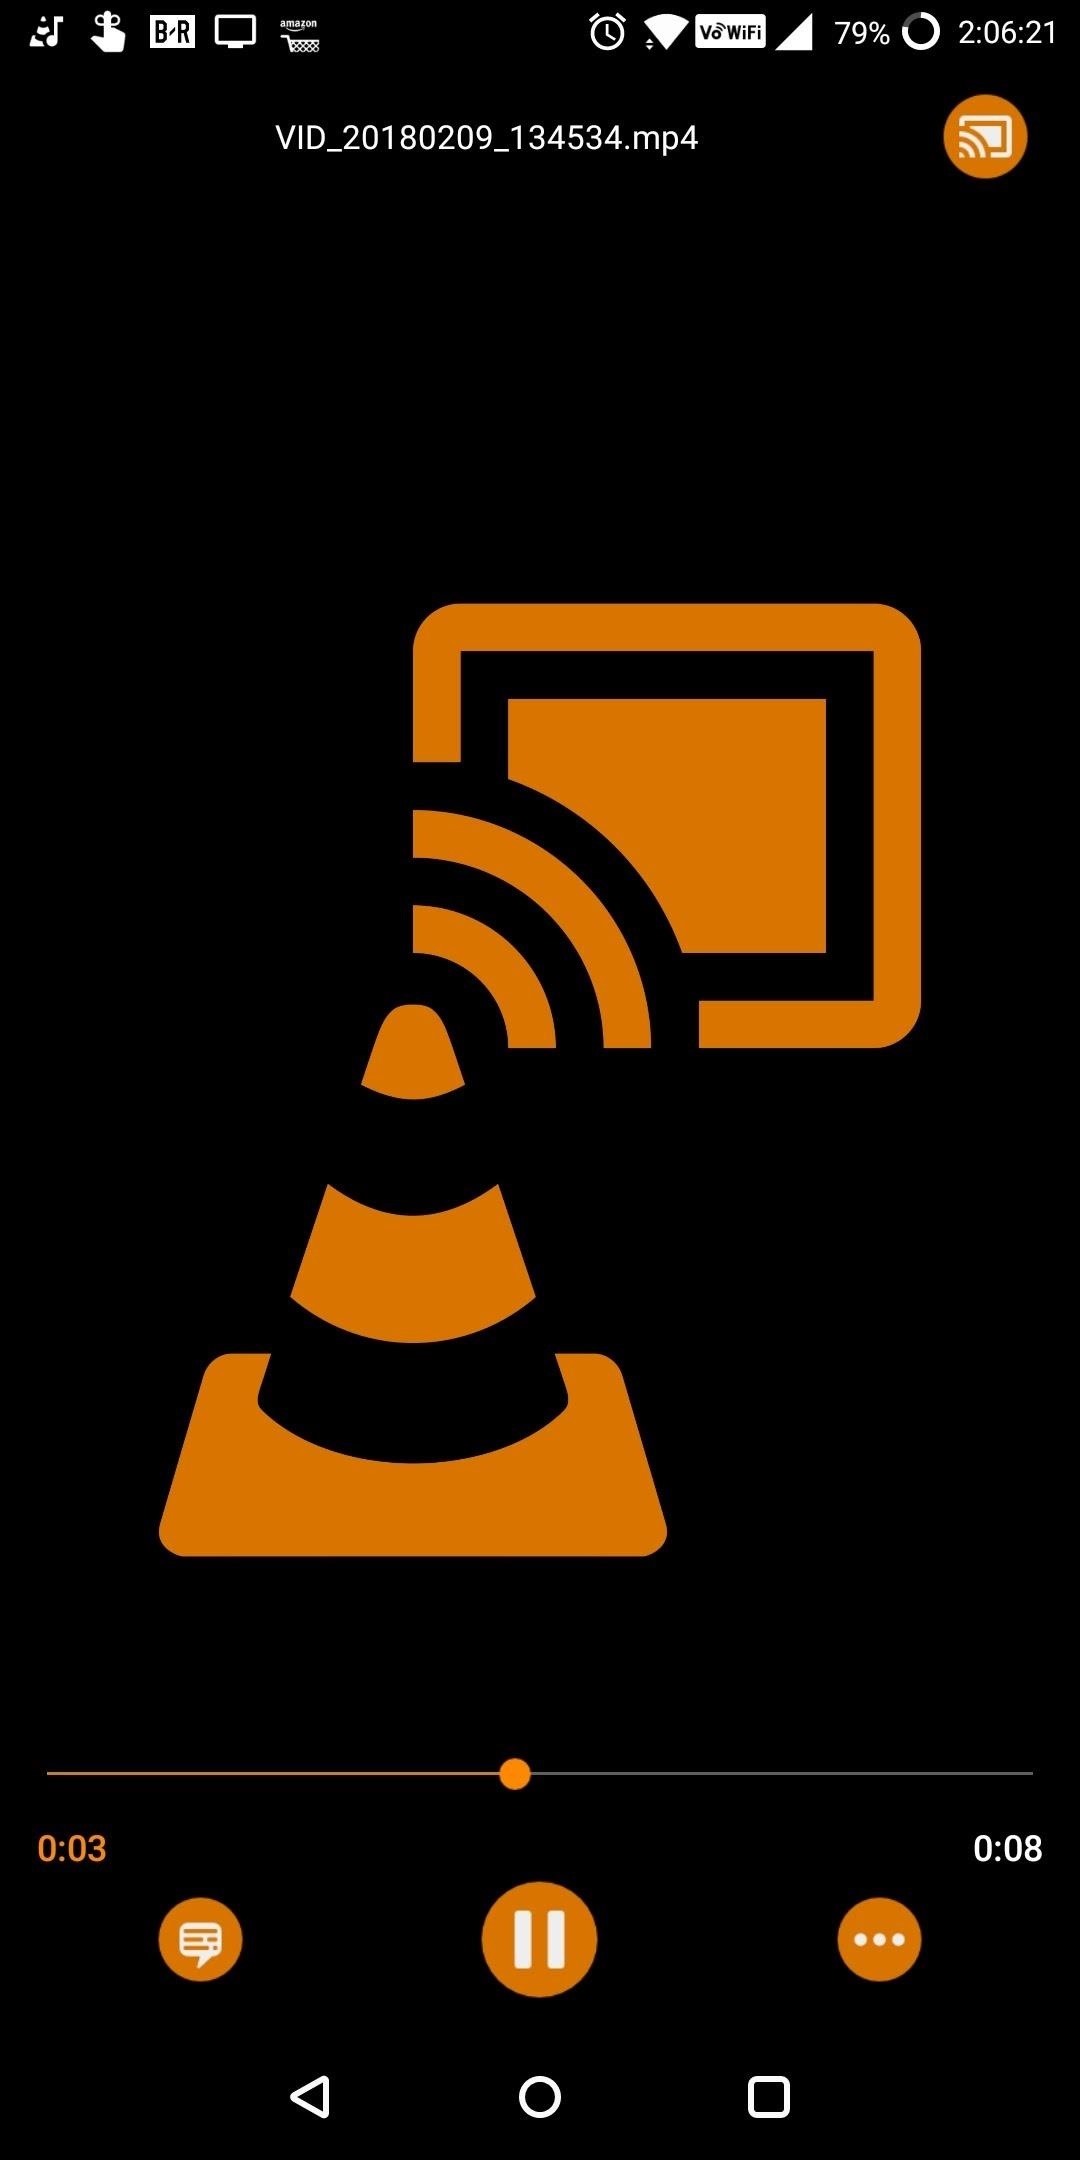 VLC 101: How to Cast Any Video to Your TV Natively